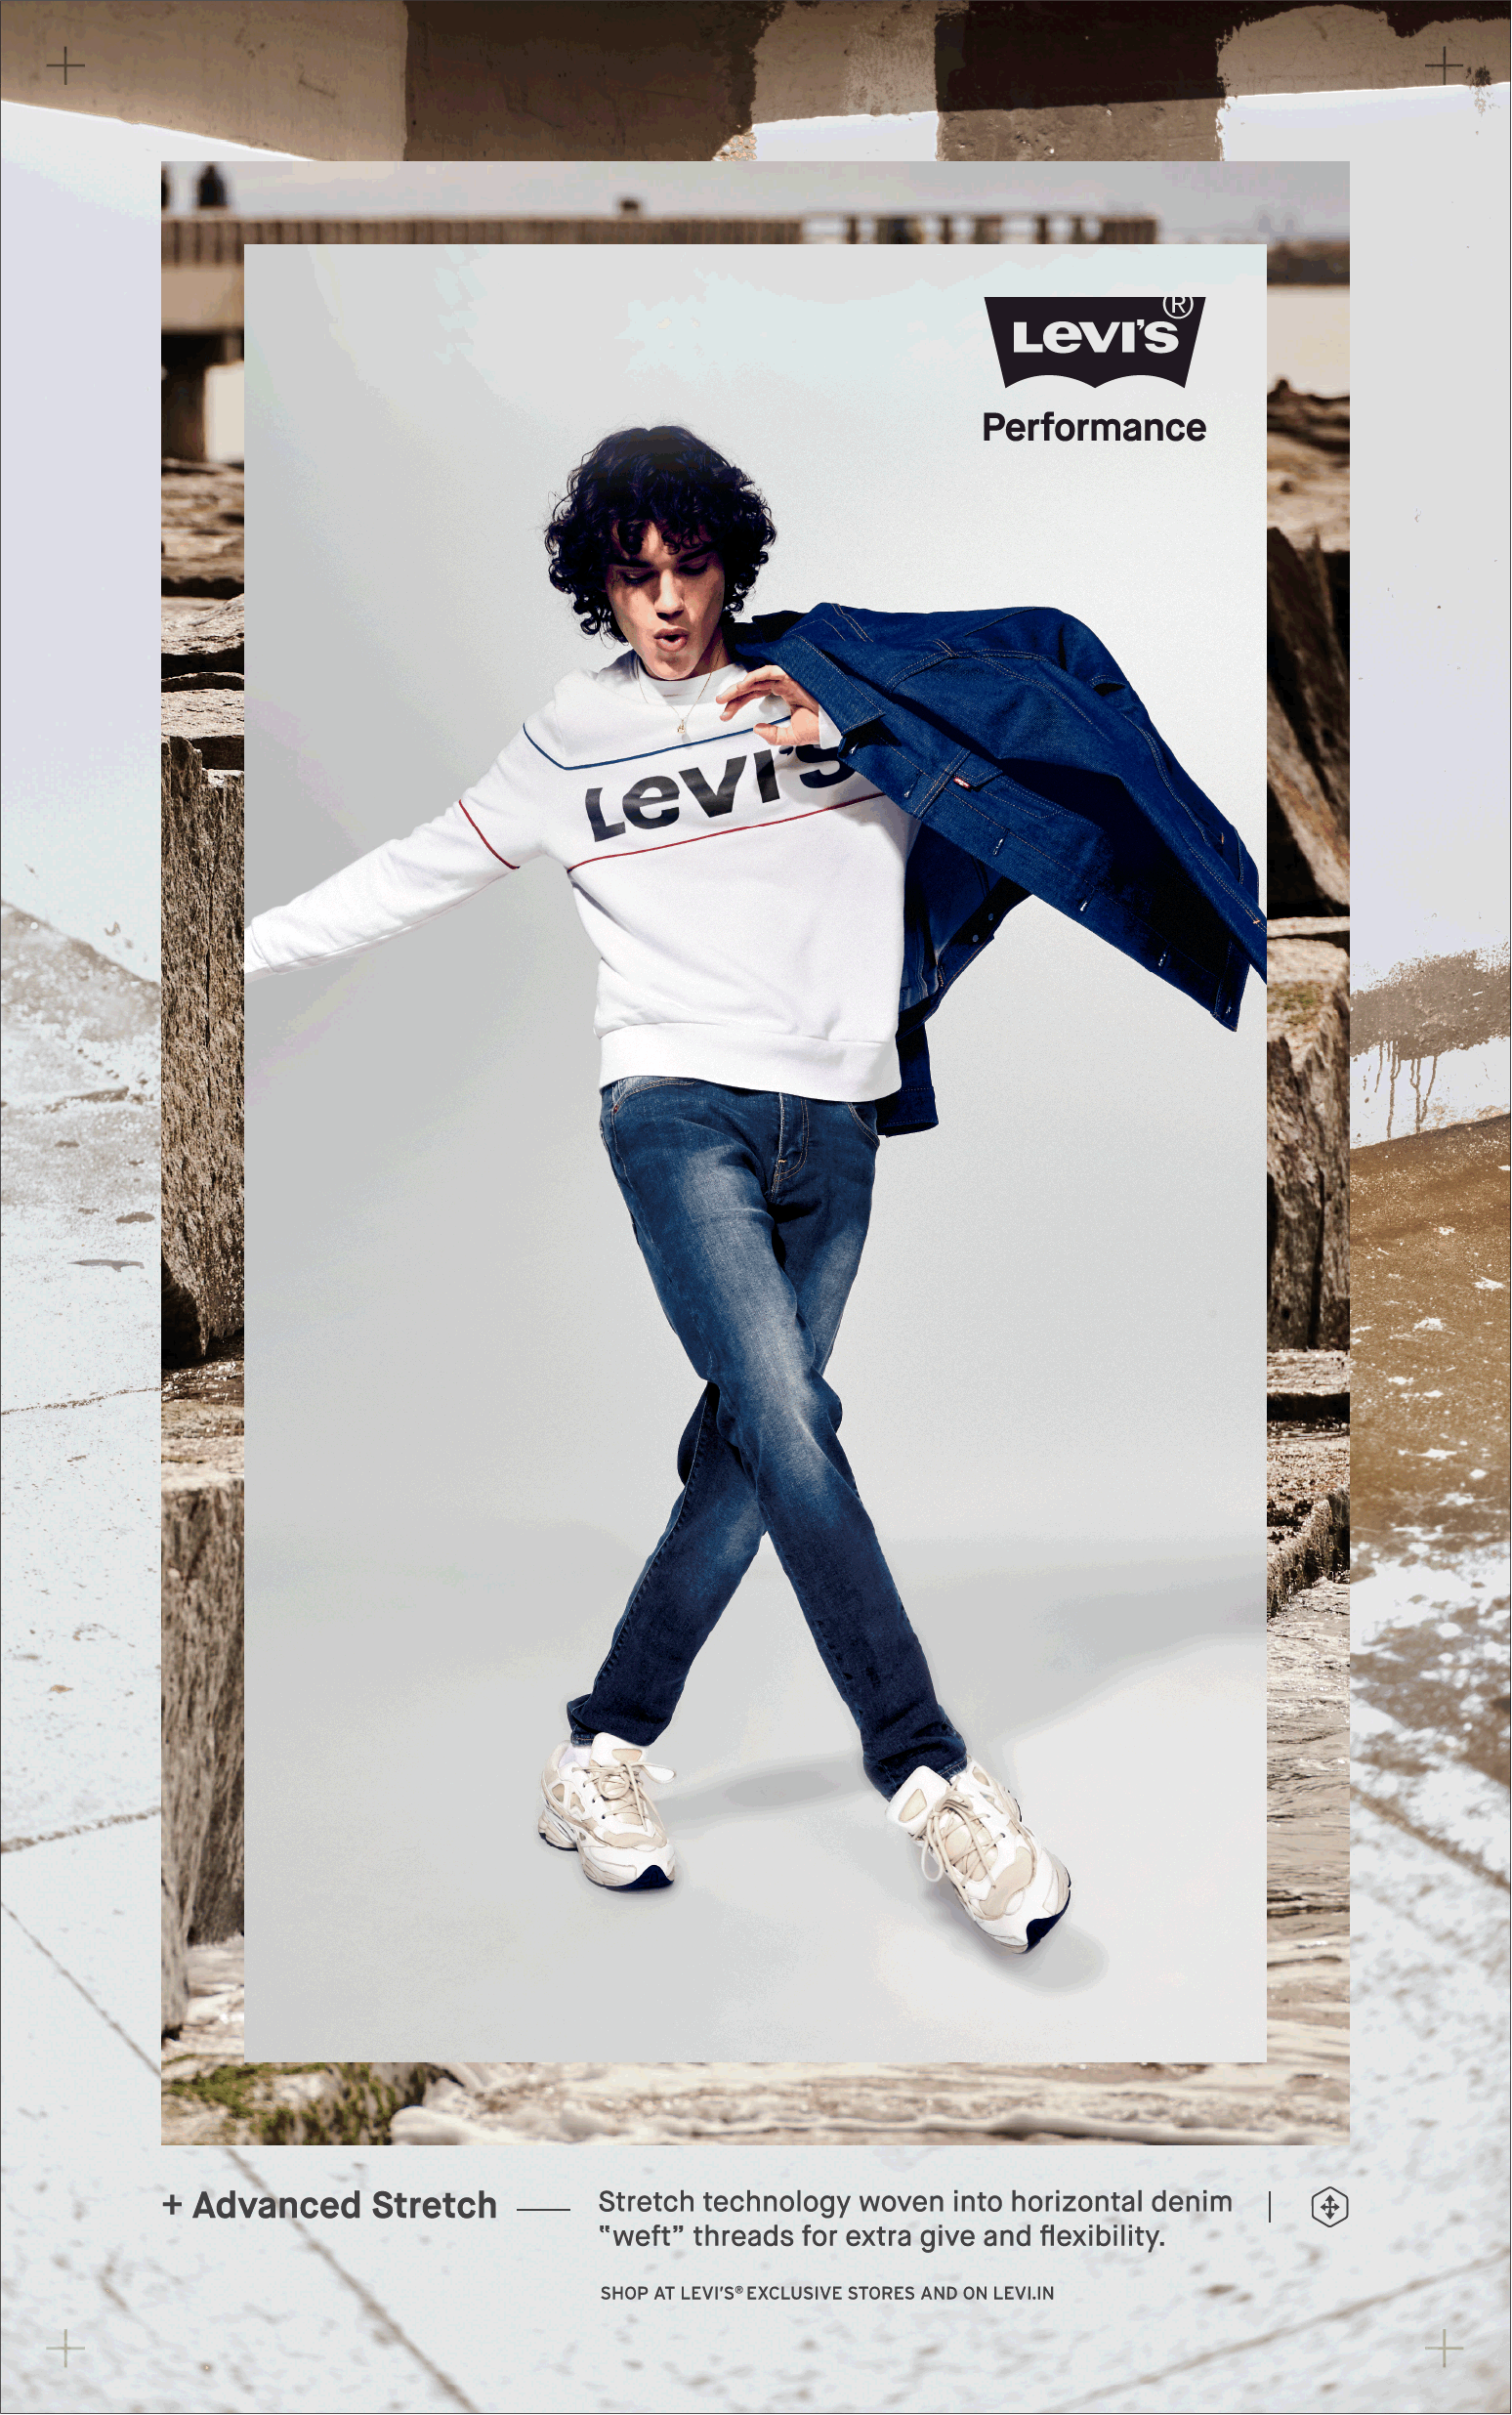 Levis Clothing Performance Advanced Stretch Ad Times Of India Delhi -  Advert Gallery